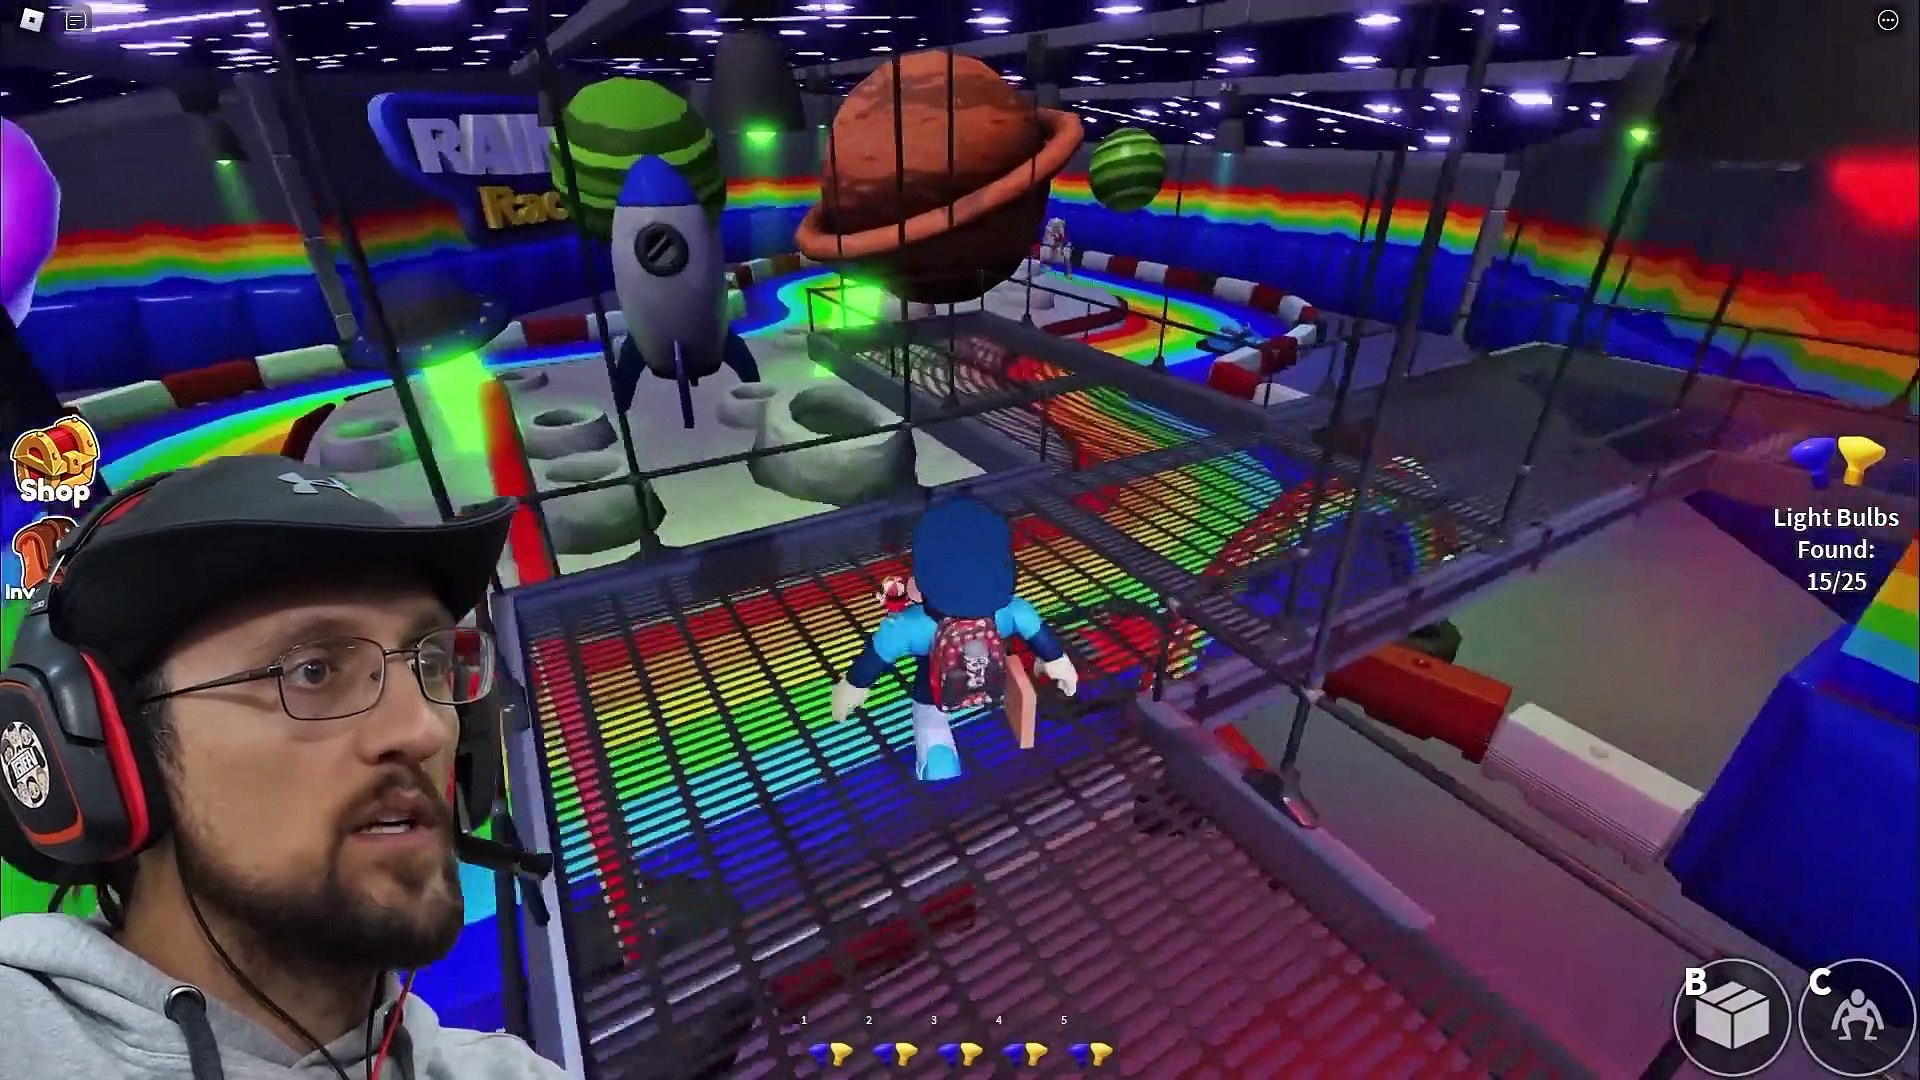 RAINBOW FRIENDS STORY In ROBLOX (New Chapter) 